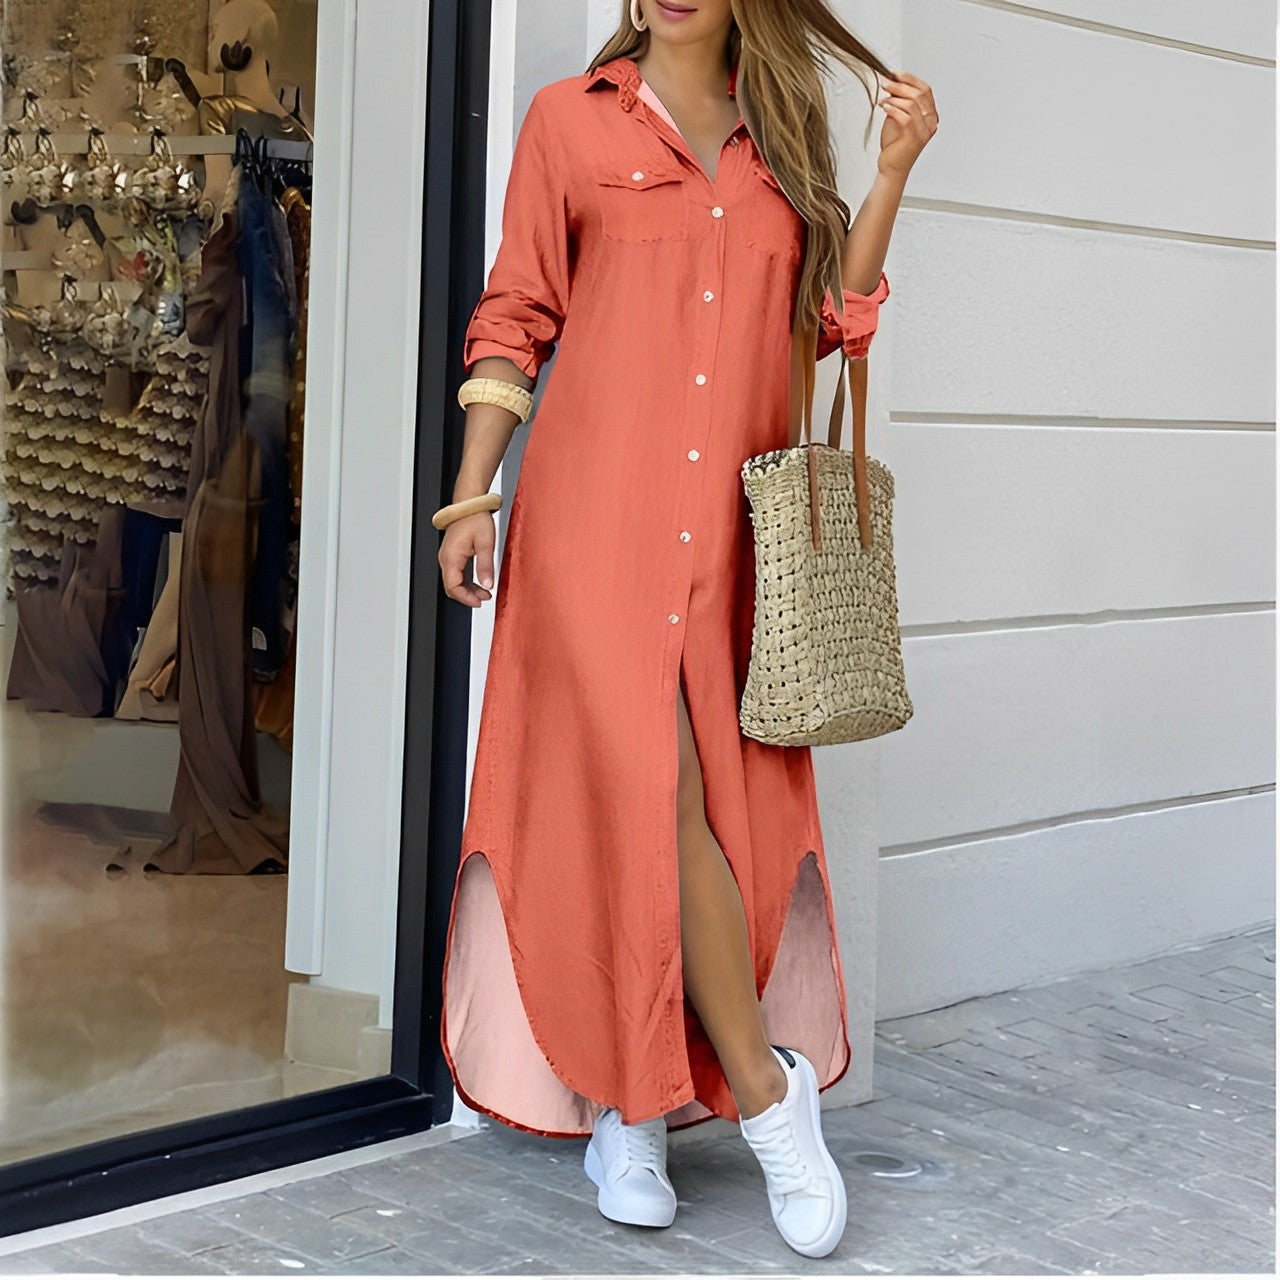 Elle&Vire® - Casual long dress with button placket